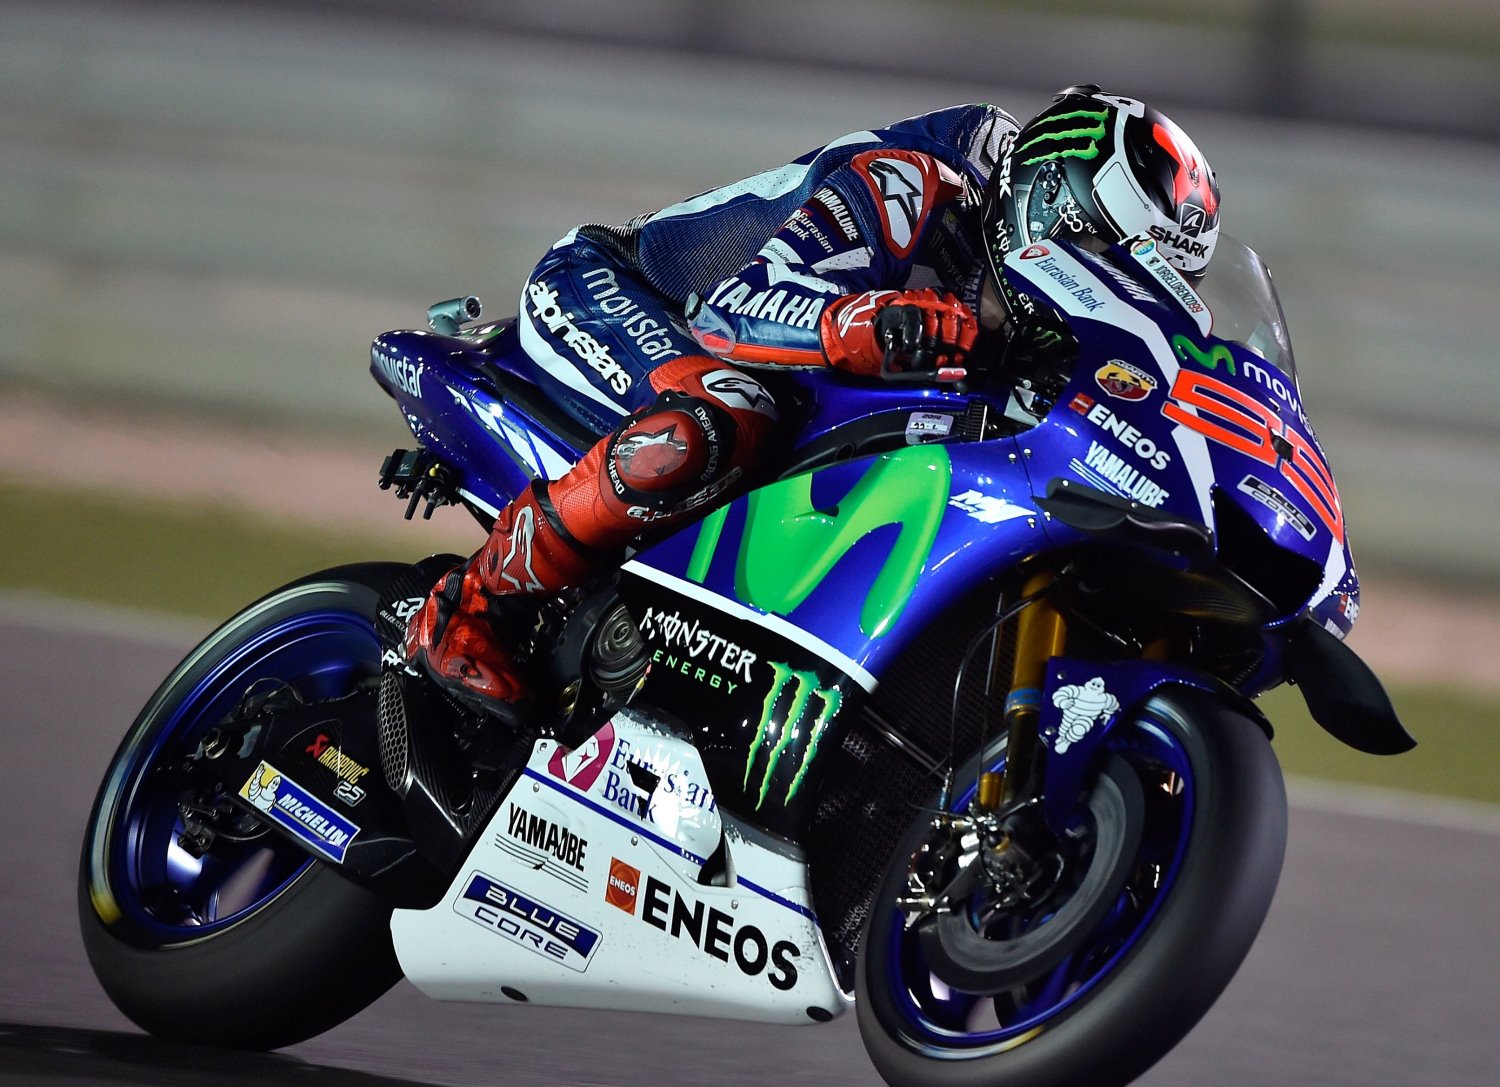 Jorge Lorenzo charges to victory under the lights in Qatar